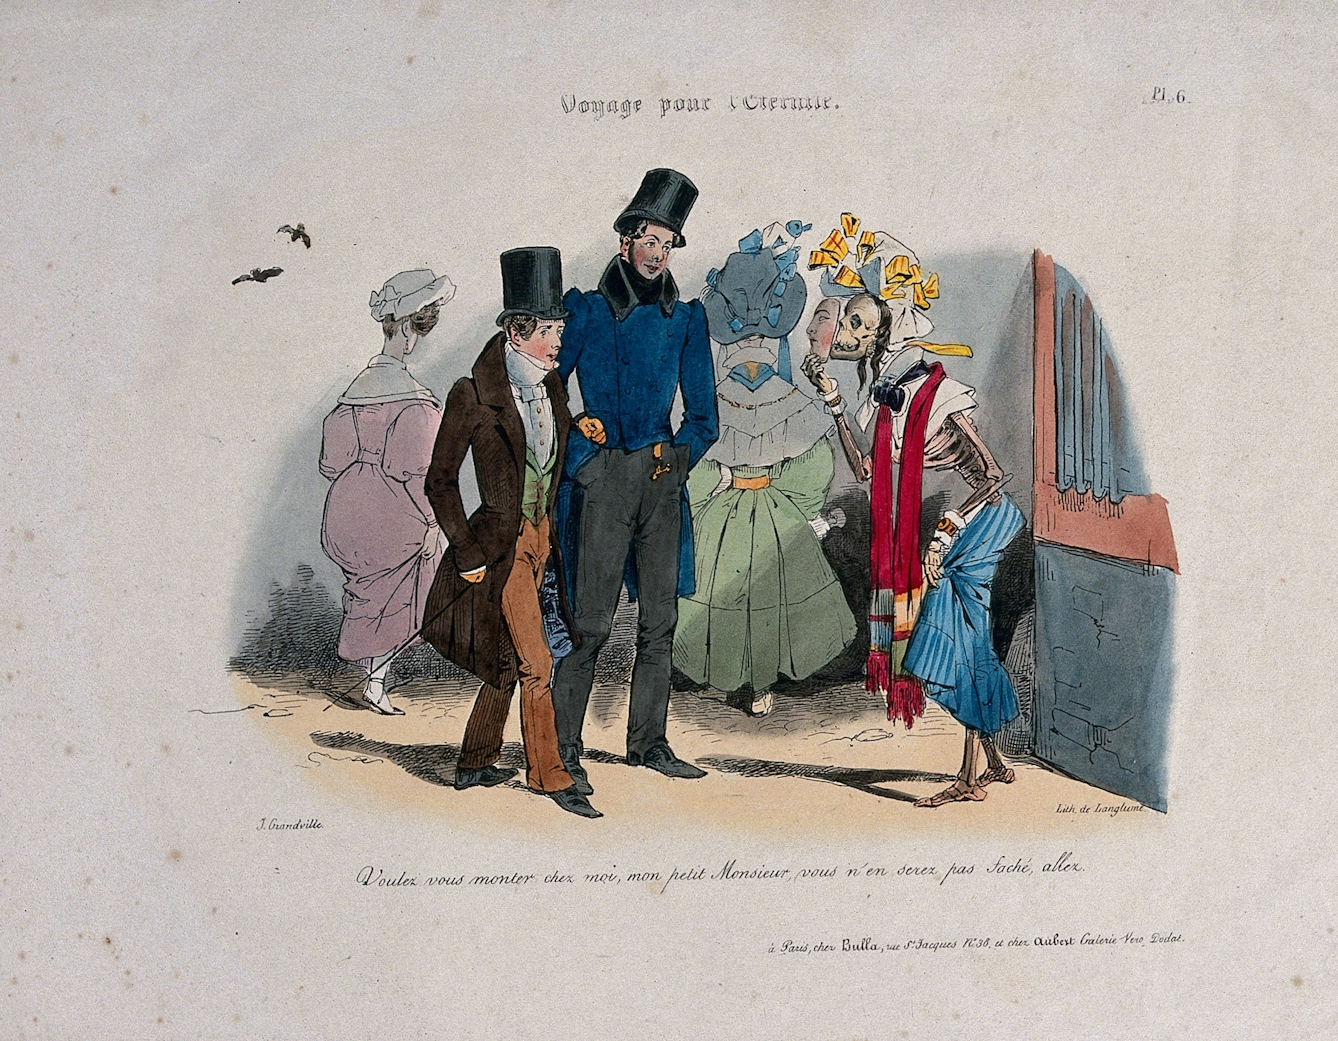 Two young men are approached by a prostitute: she is a clothed skeleton holding a made-up mask in front of her face, representing syphilis. Lithograph by J.J. Grandville, 1830